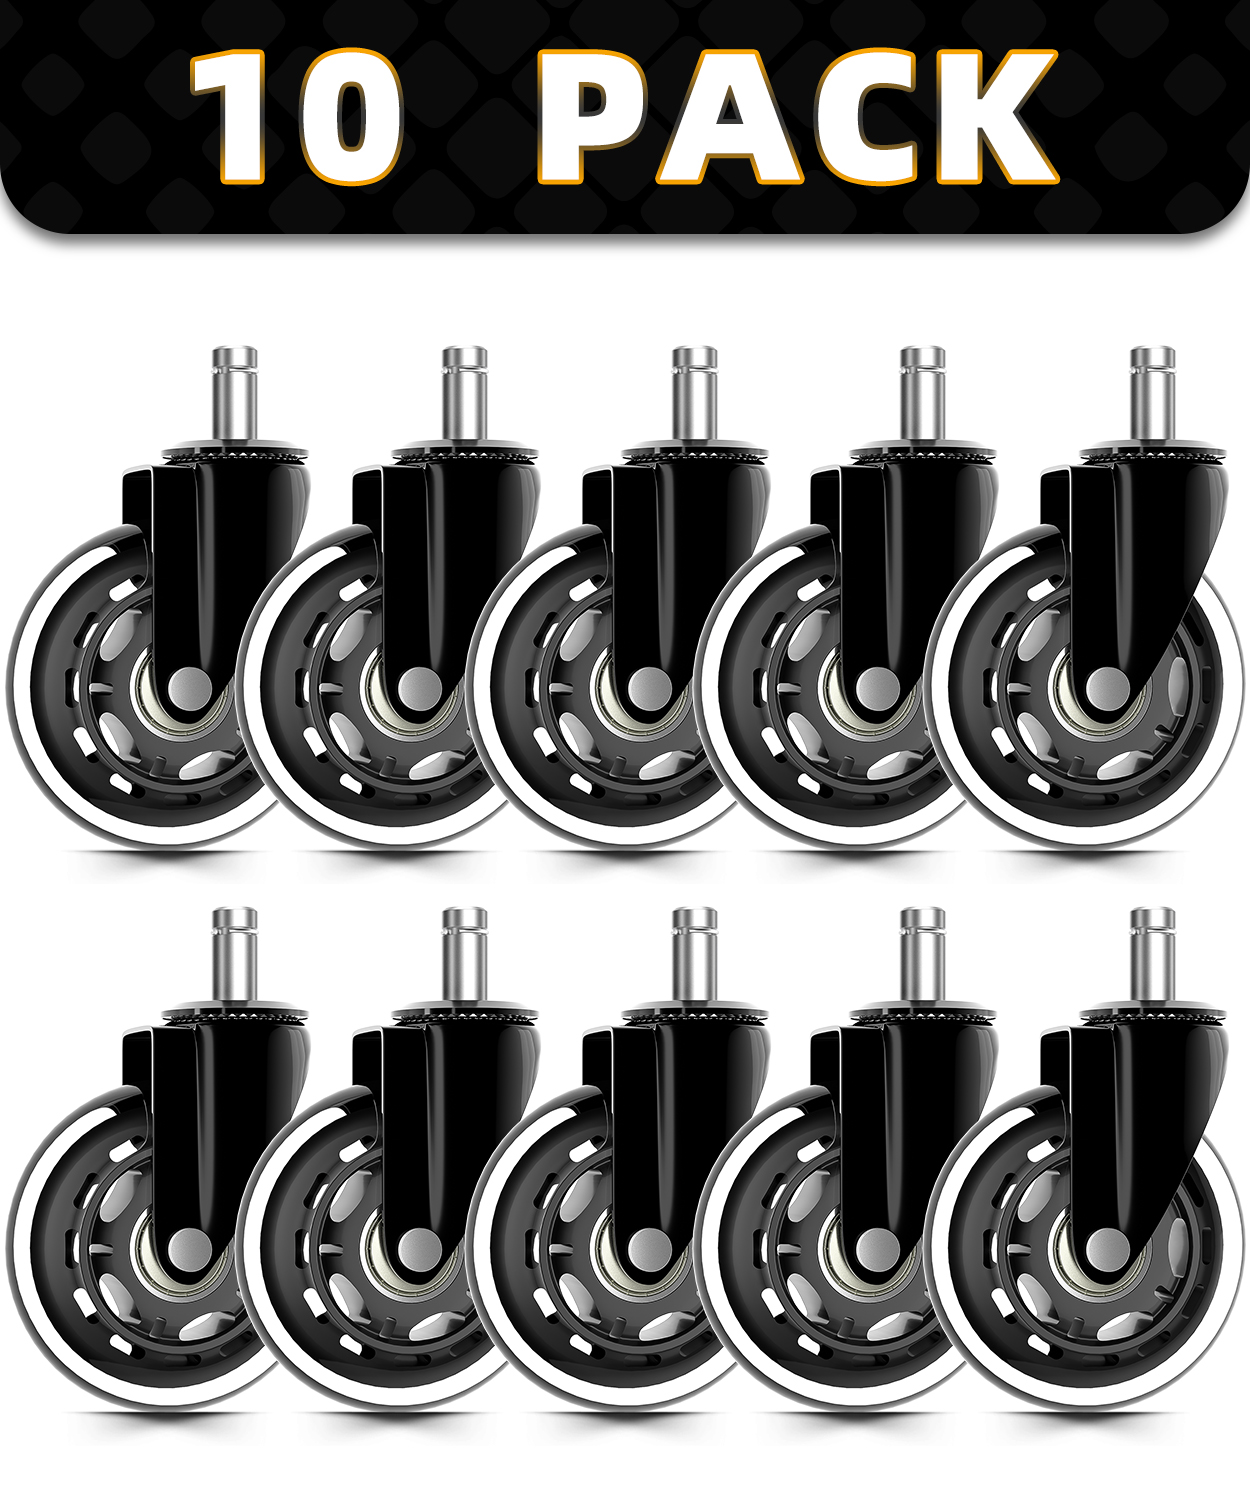 Wood Safe Office Chair Wheels Replacement 10-Pack, Heavy Duty Rubber Caster Wheels Roll Smooth, Chair Roller Wheels with 7/16 Inch Stem